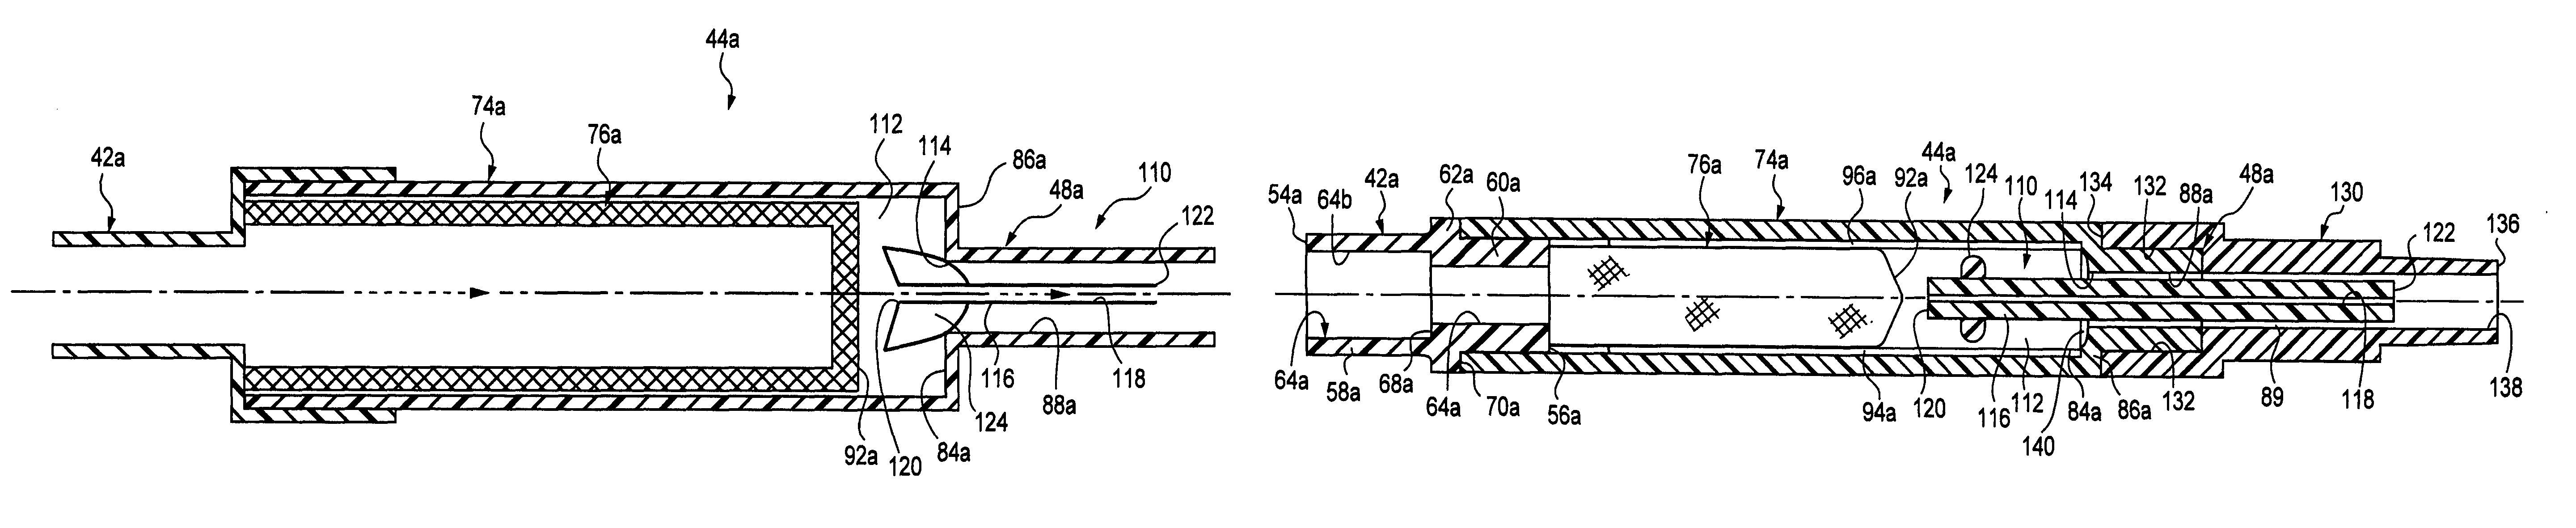 Surgical apparatus and methods asociated therewith